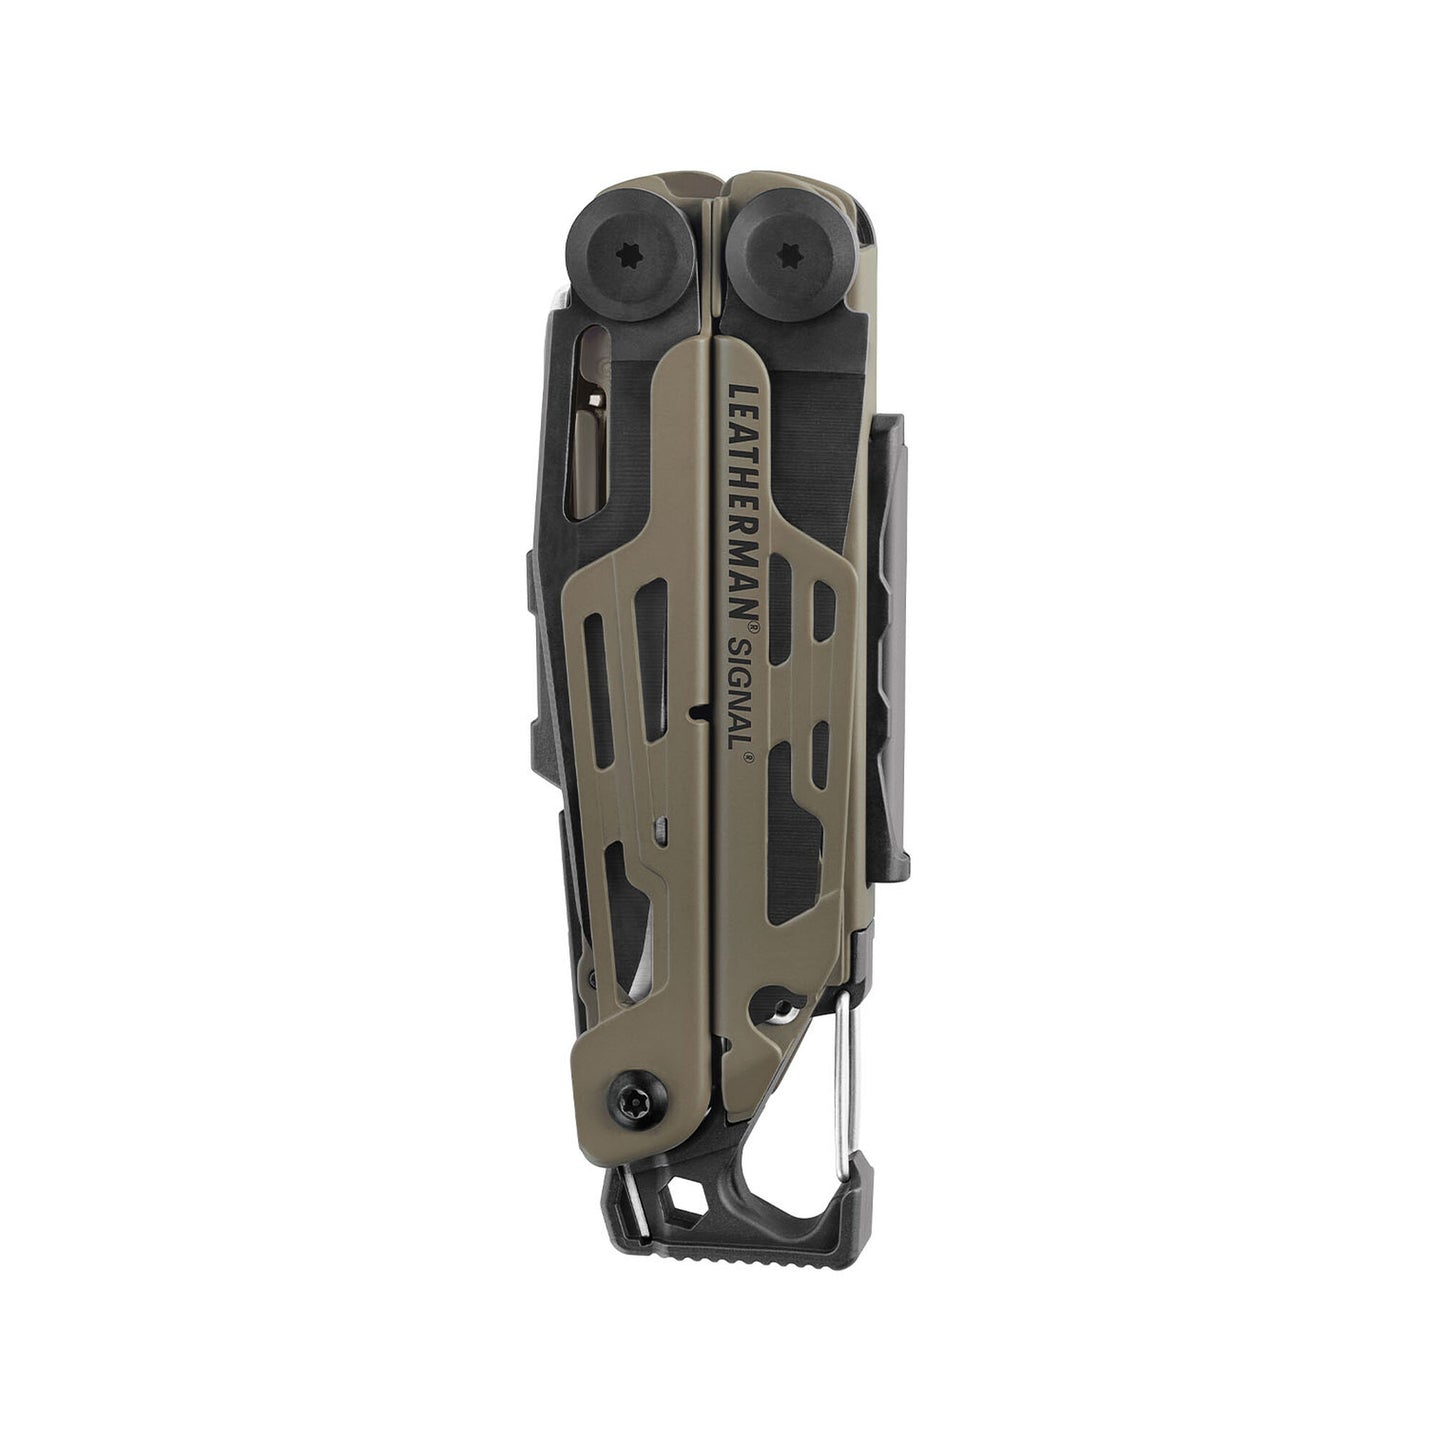 Pince Leatherman multifonctions Signal (19 outils) - Leatherman-T.A DEFENSE